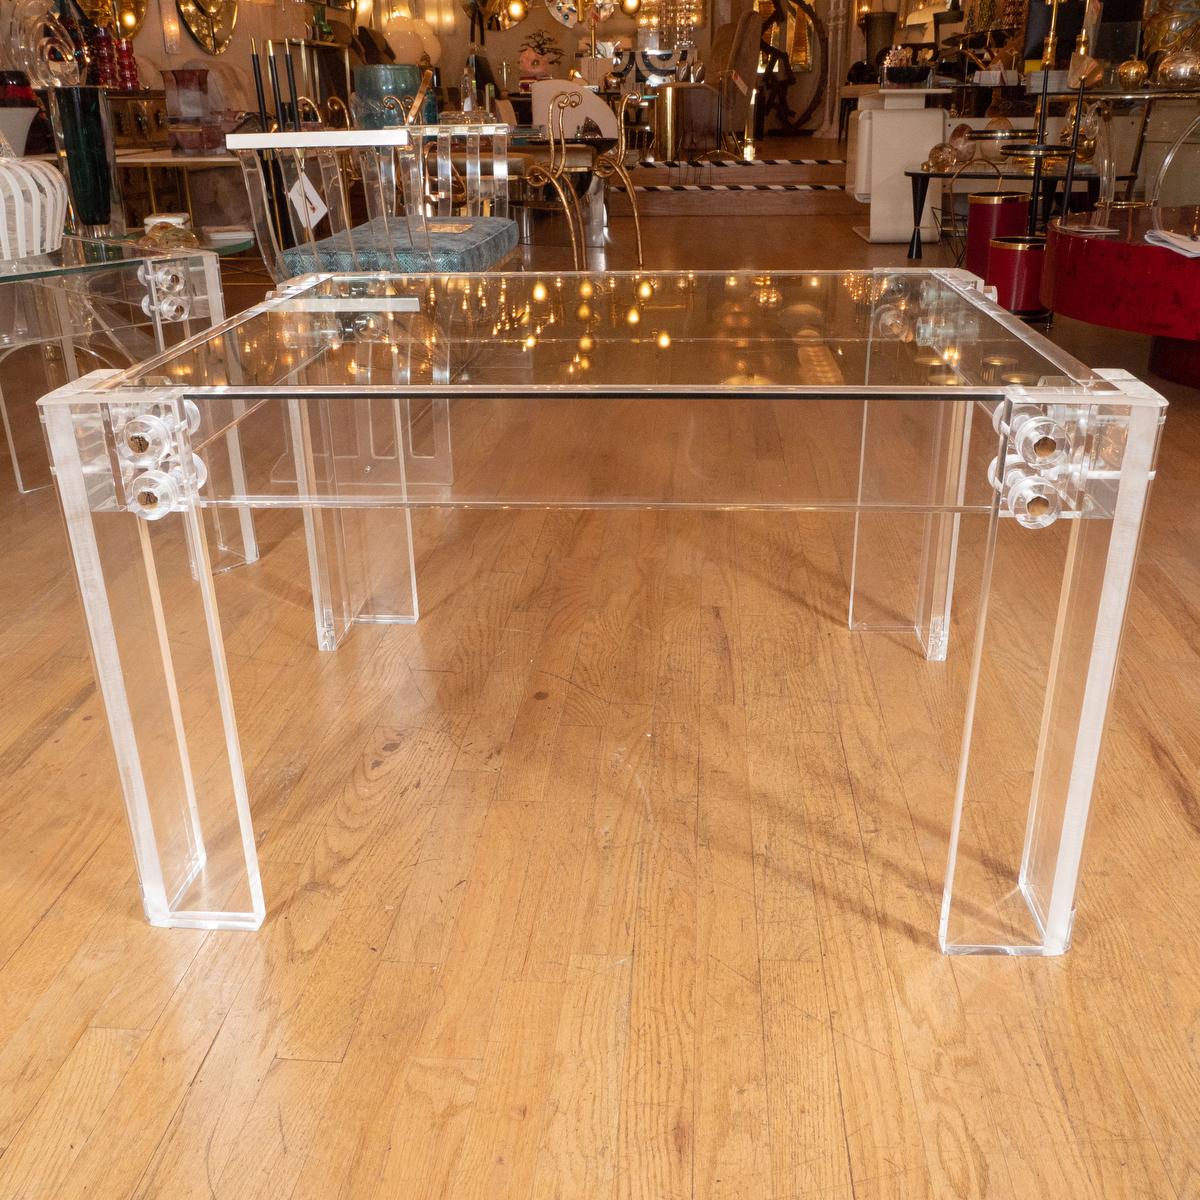 Pair of Lucite and glass end tables with nickel details.